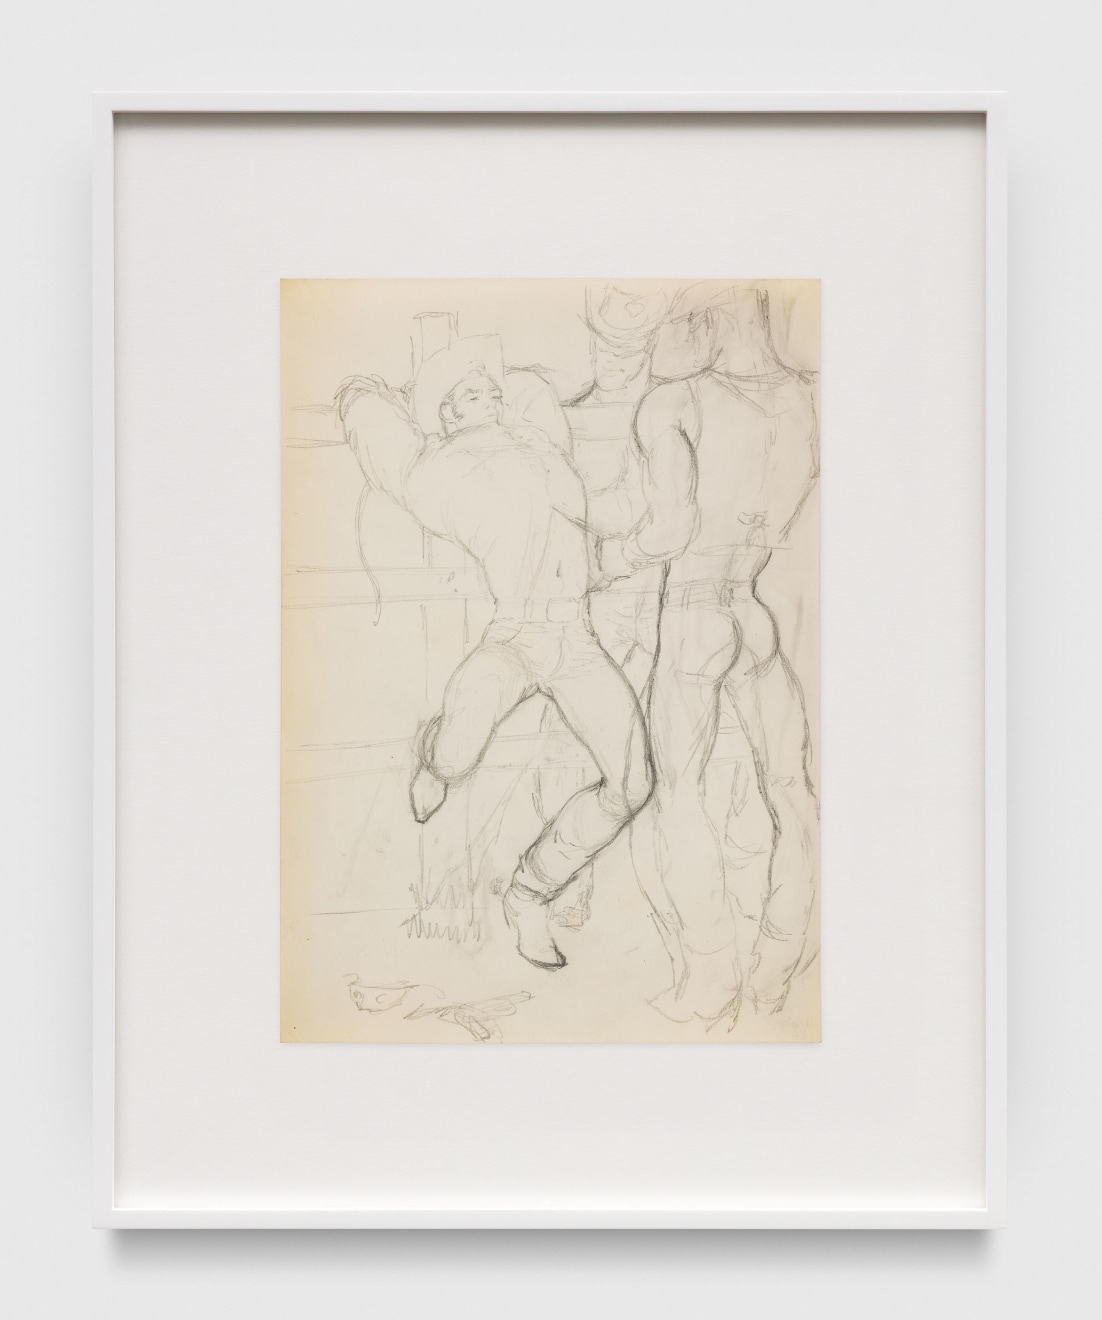 Tom of Finland, Untitled (Preparatory Drawing), c. 1963